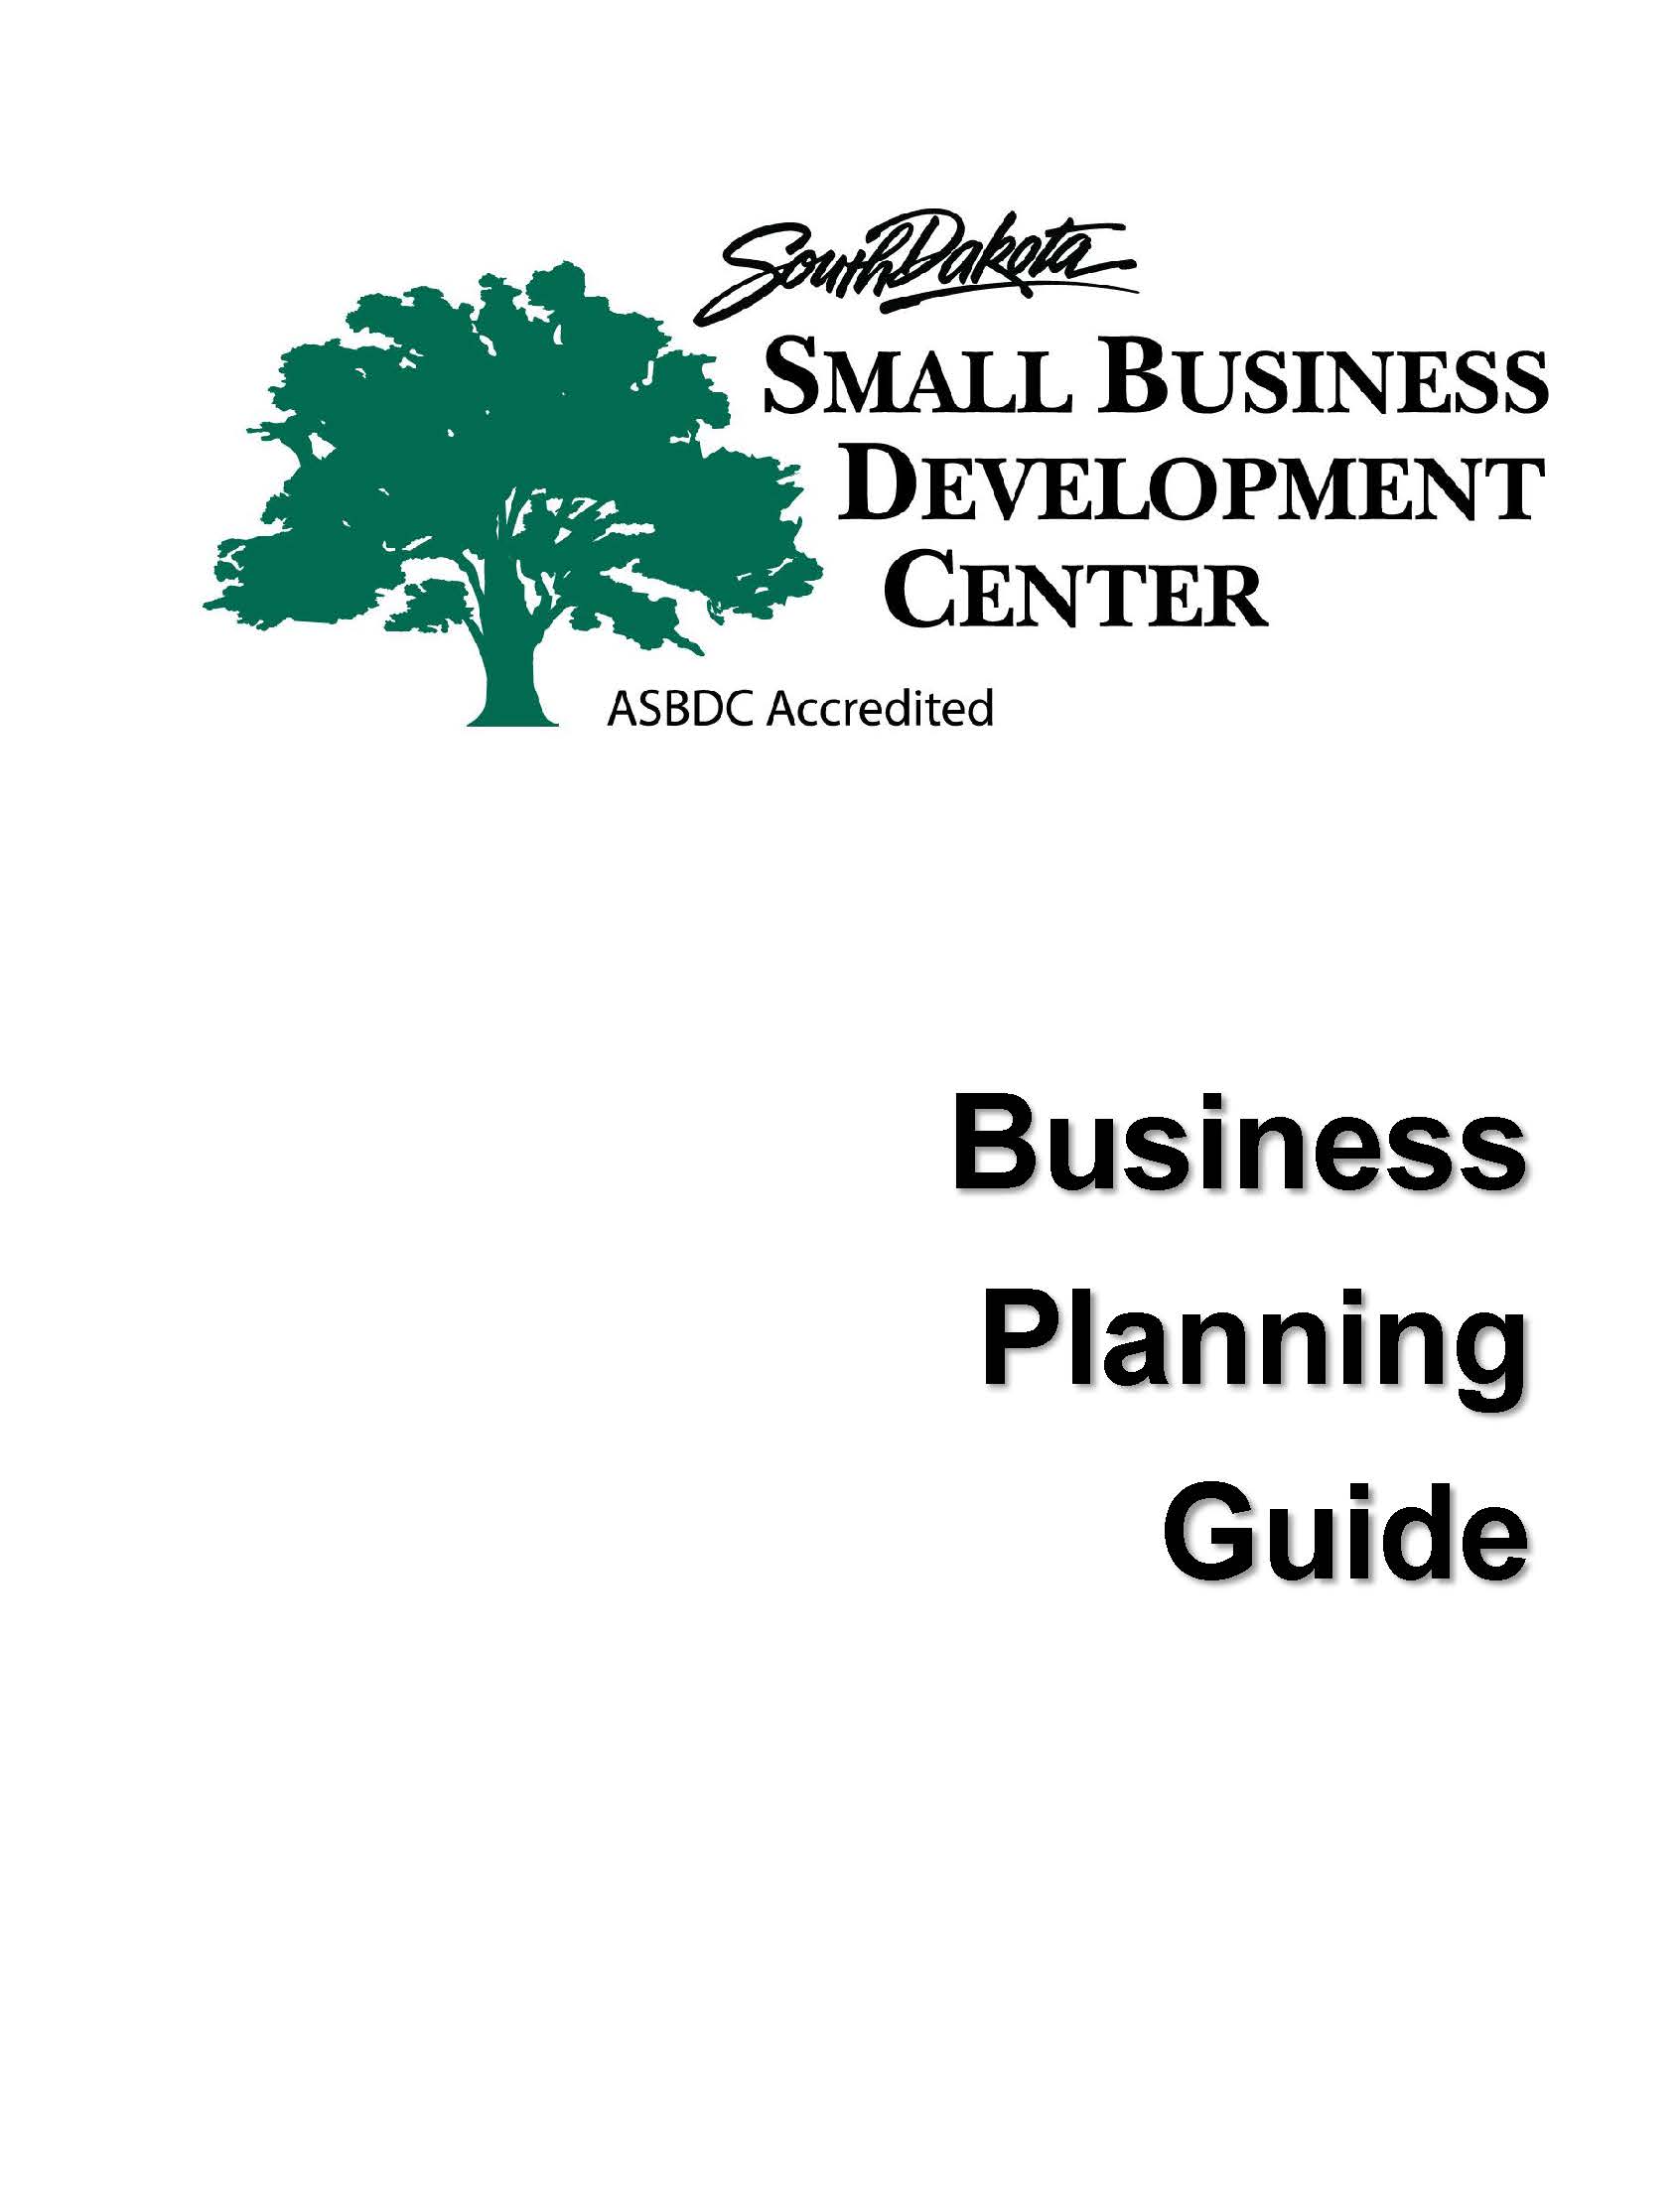 SD SBDC Business Planning Guide Cover